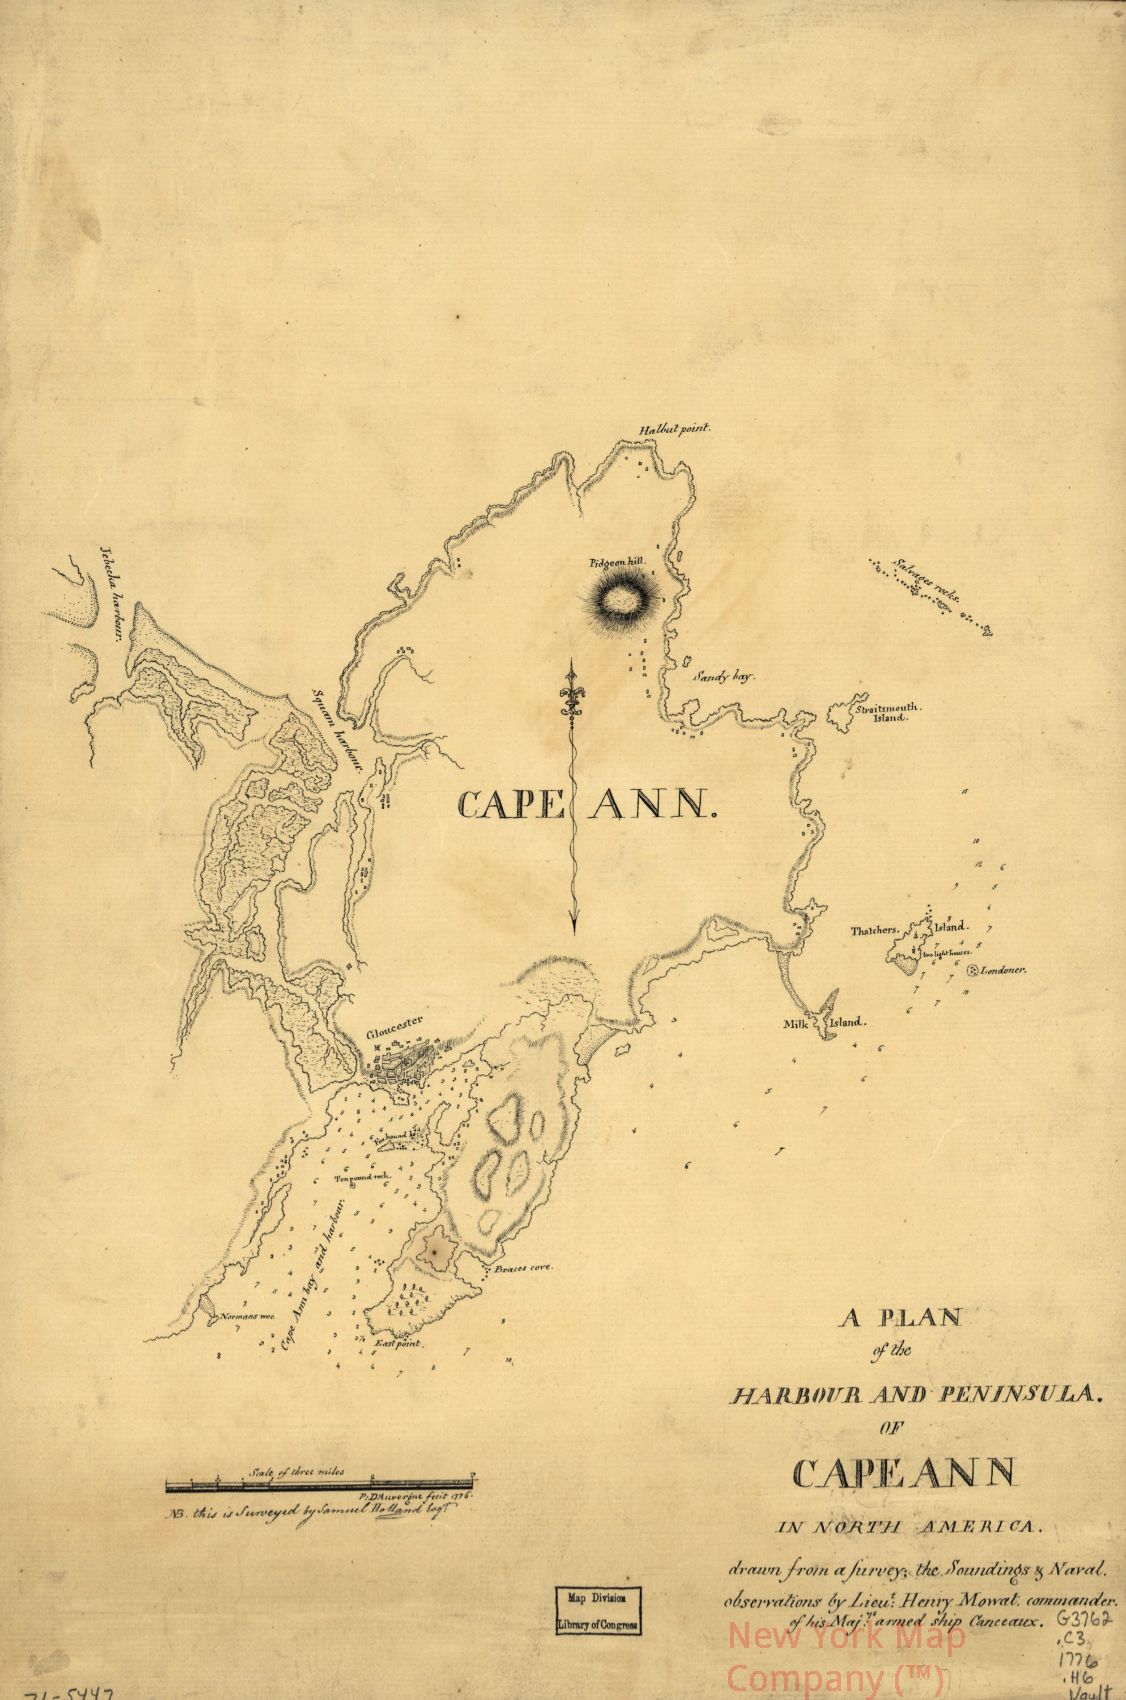 1776 map A plan of the harbour and peninsula of Cape Ann in North America,. Map Subjects: Ann | Cape | Ann | Cape Mass | Gloucester | Harbors | Massachusetts |